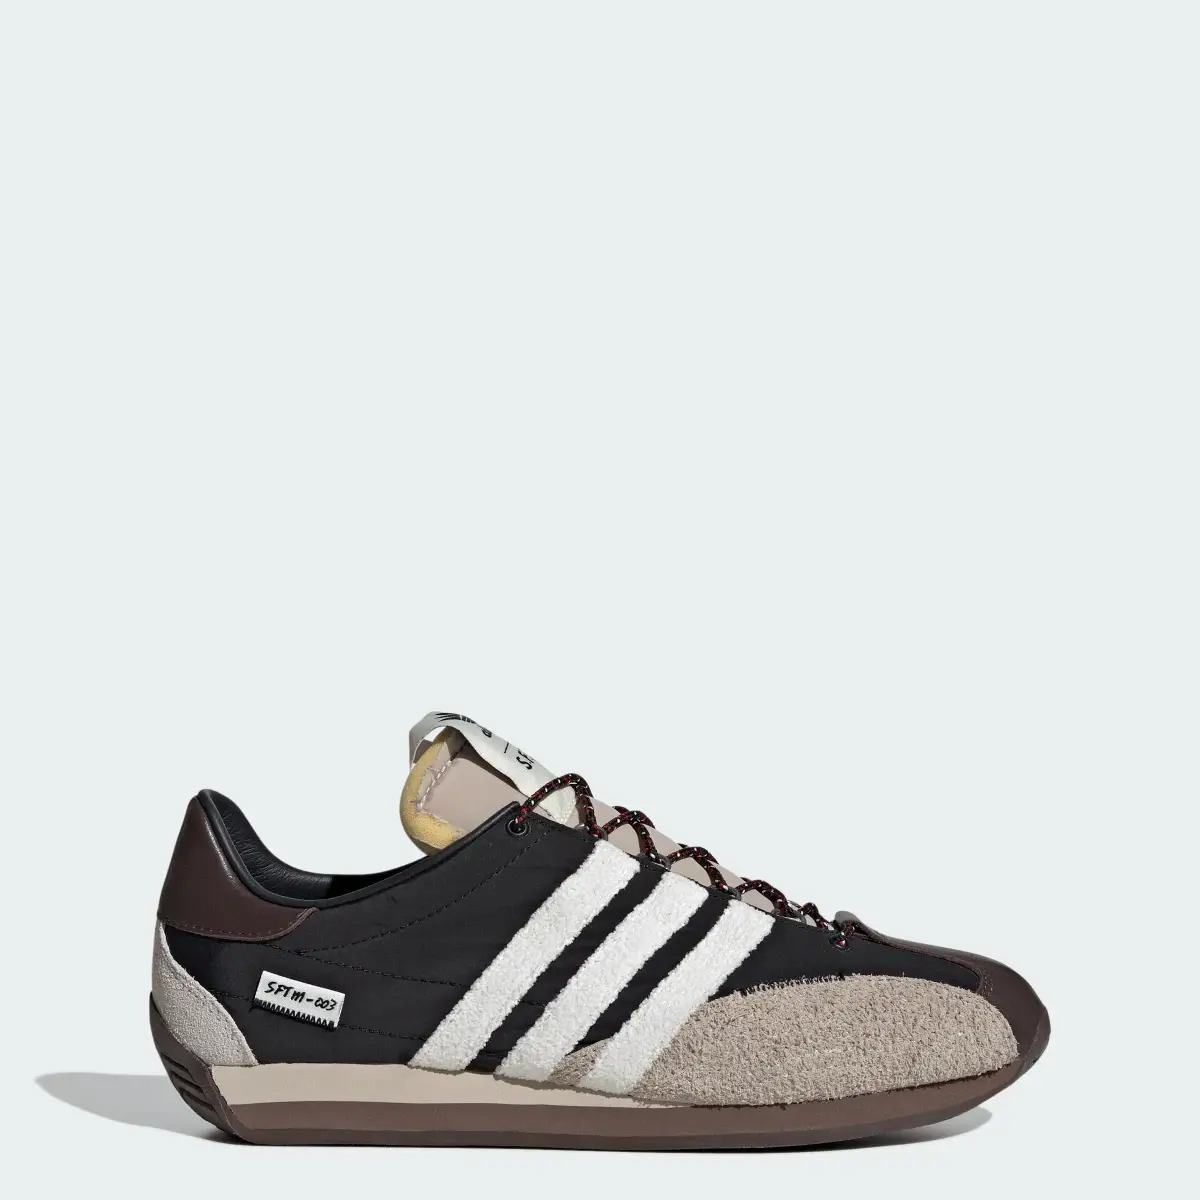 Adidas Chaussure Country OG Low. 1